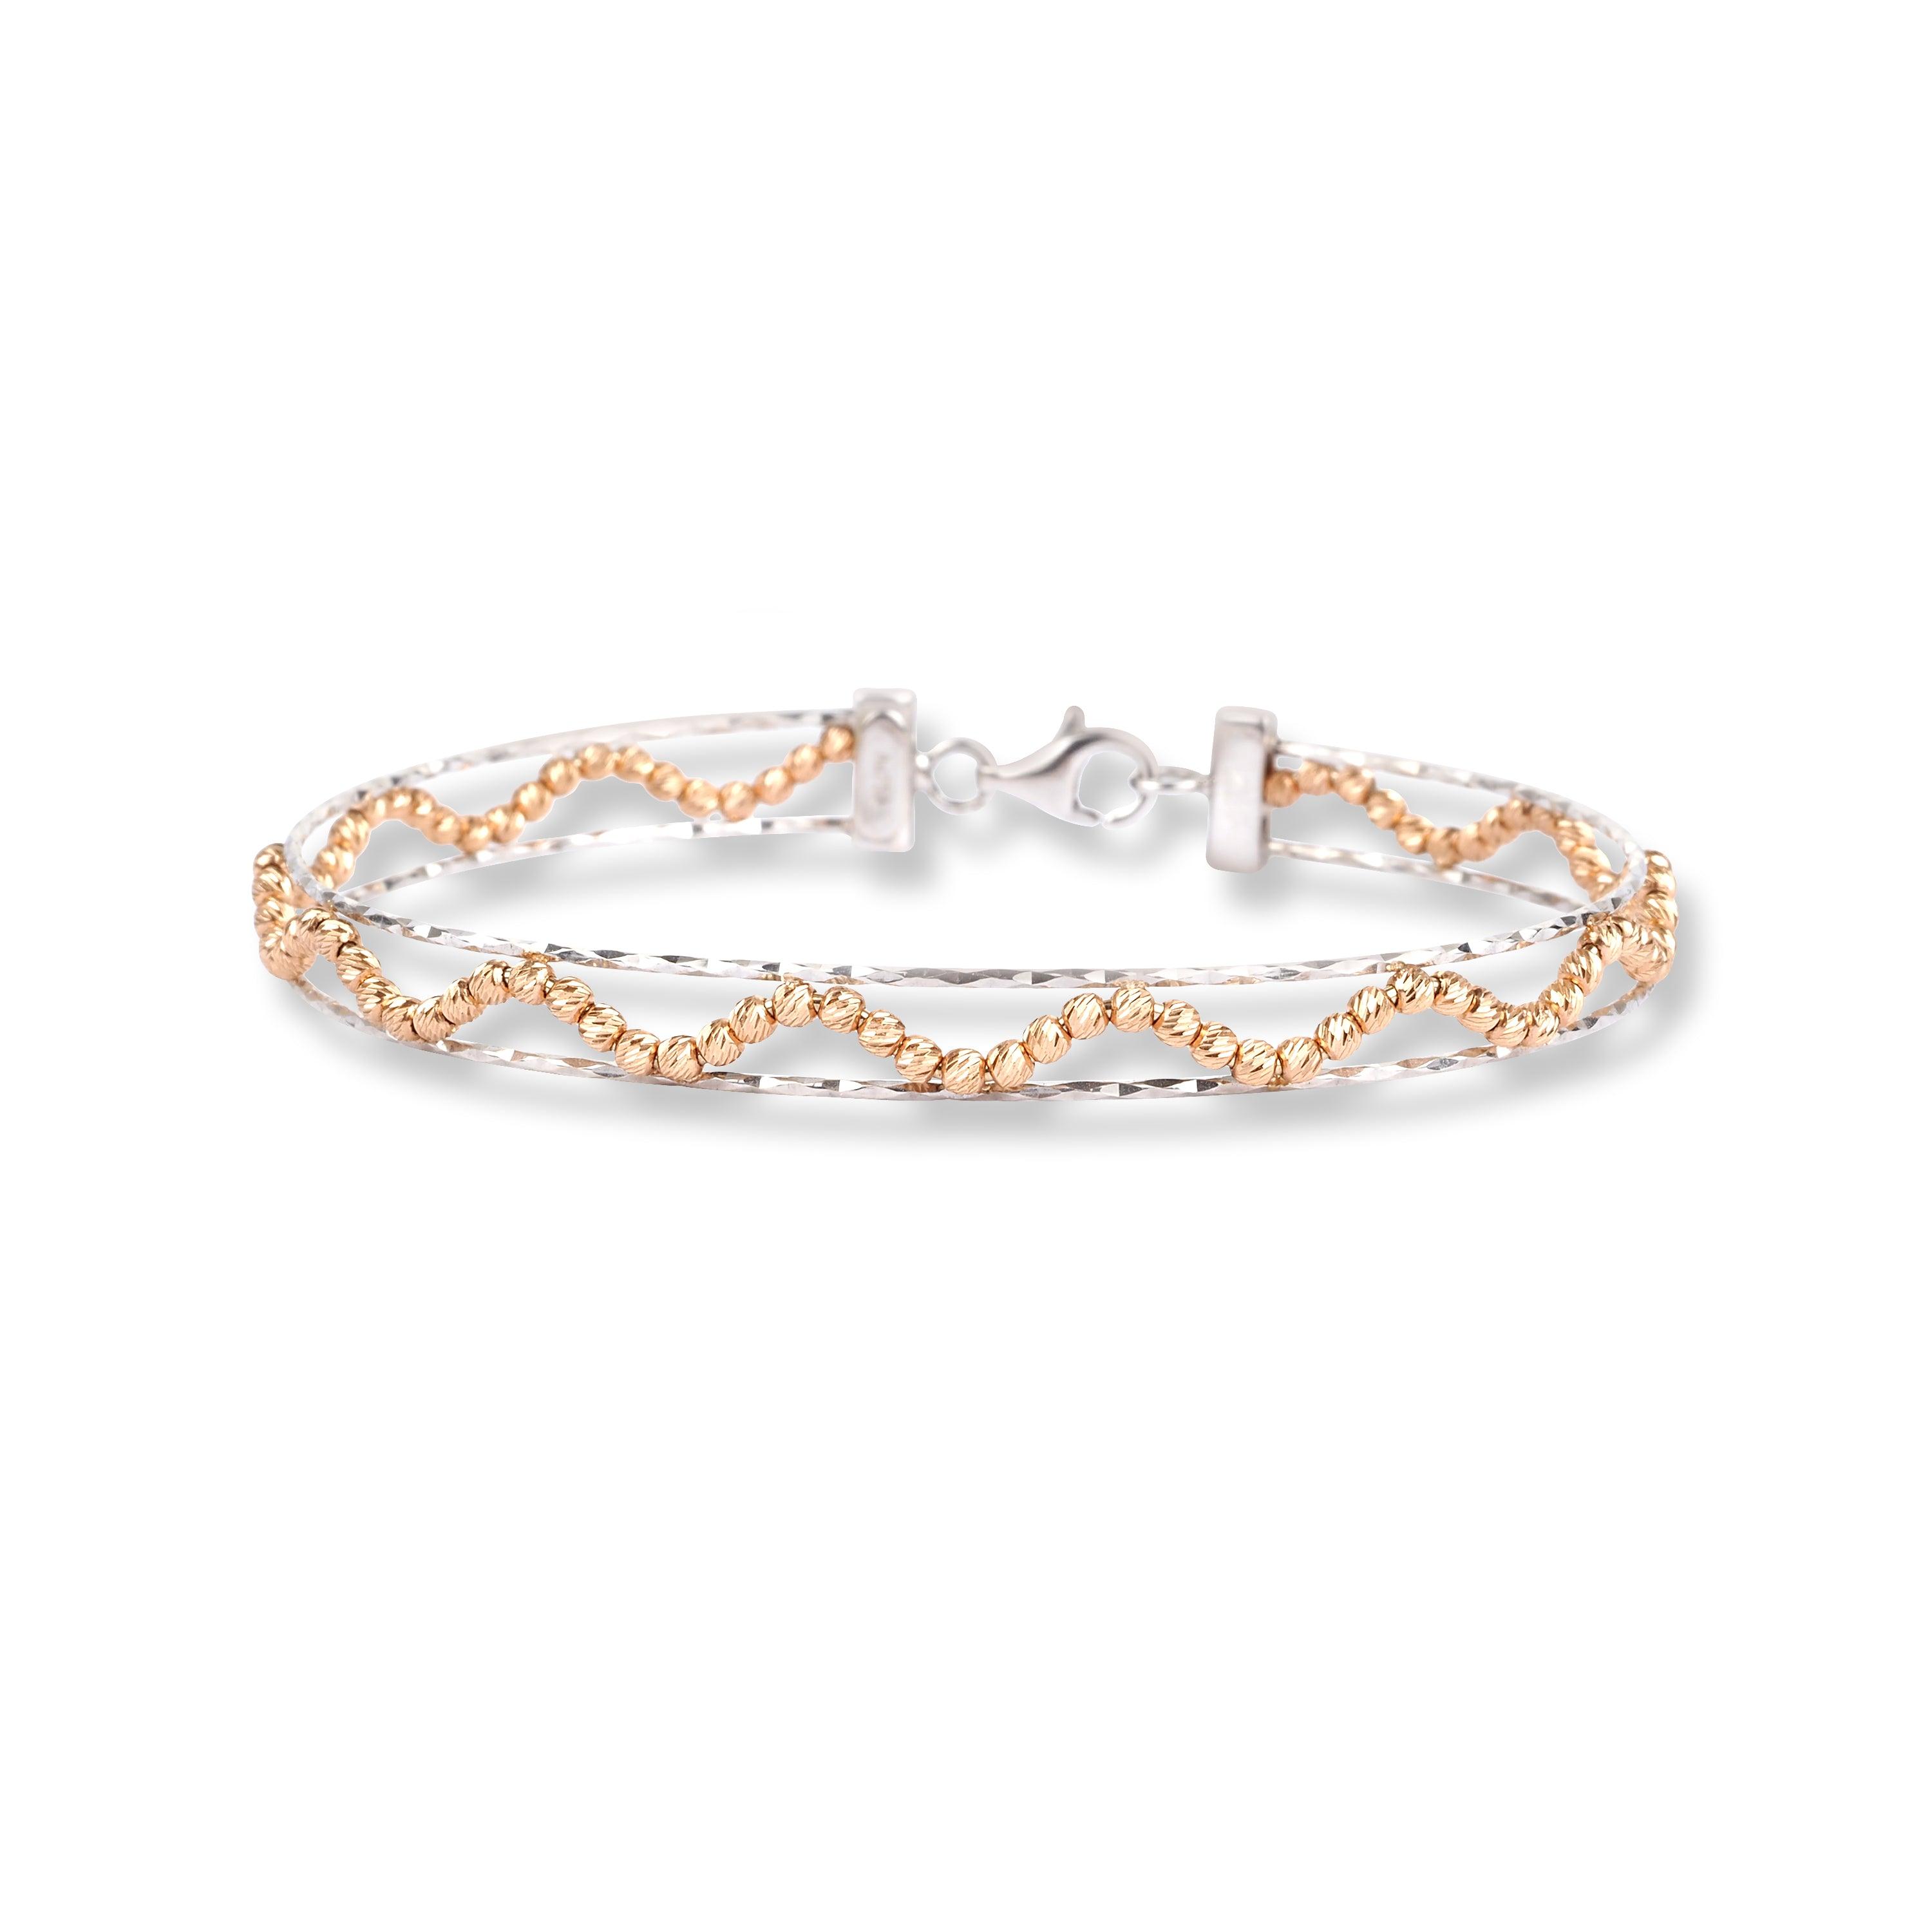 18ct White Gold Bangles in Rose Gold Diamond Cutting Beads in Centre with Lobster Claw B-4122 - Minar Jewellers